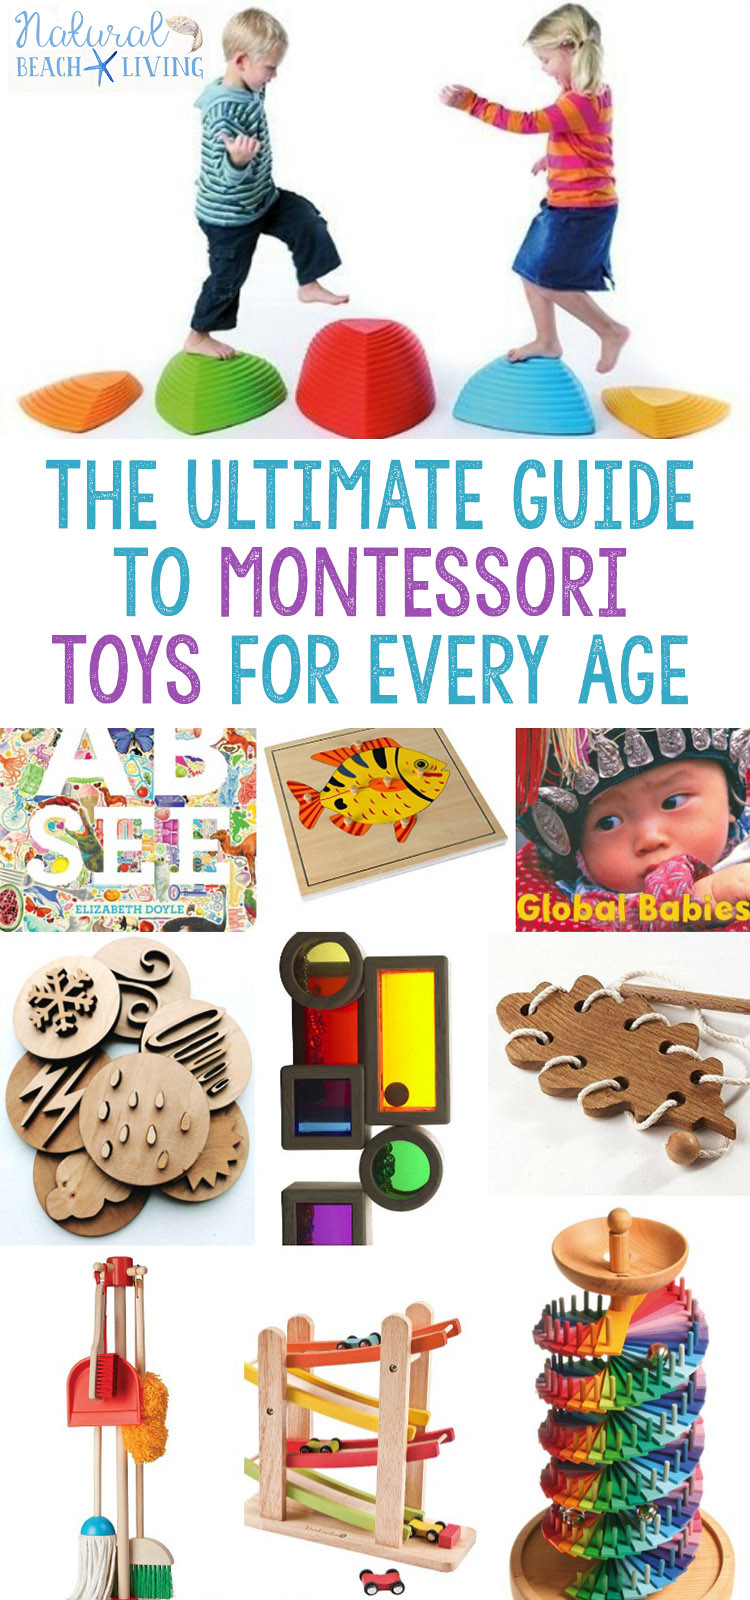 Gift Ideas For 5 Year Old Boys
 The Best Montessori Toys for 5 Year Olds Natural Beach